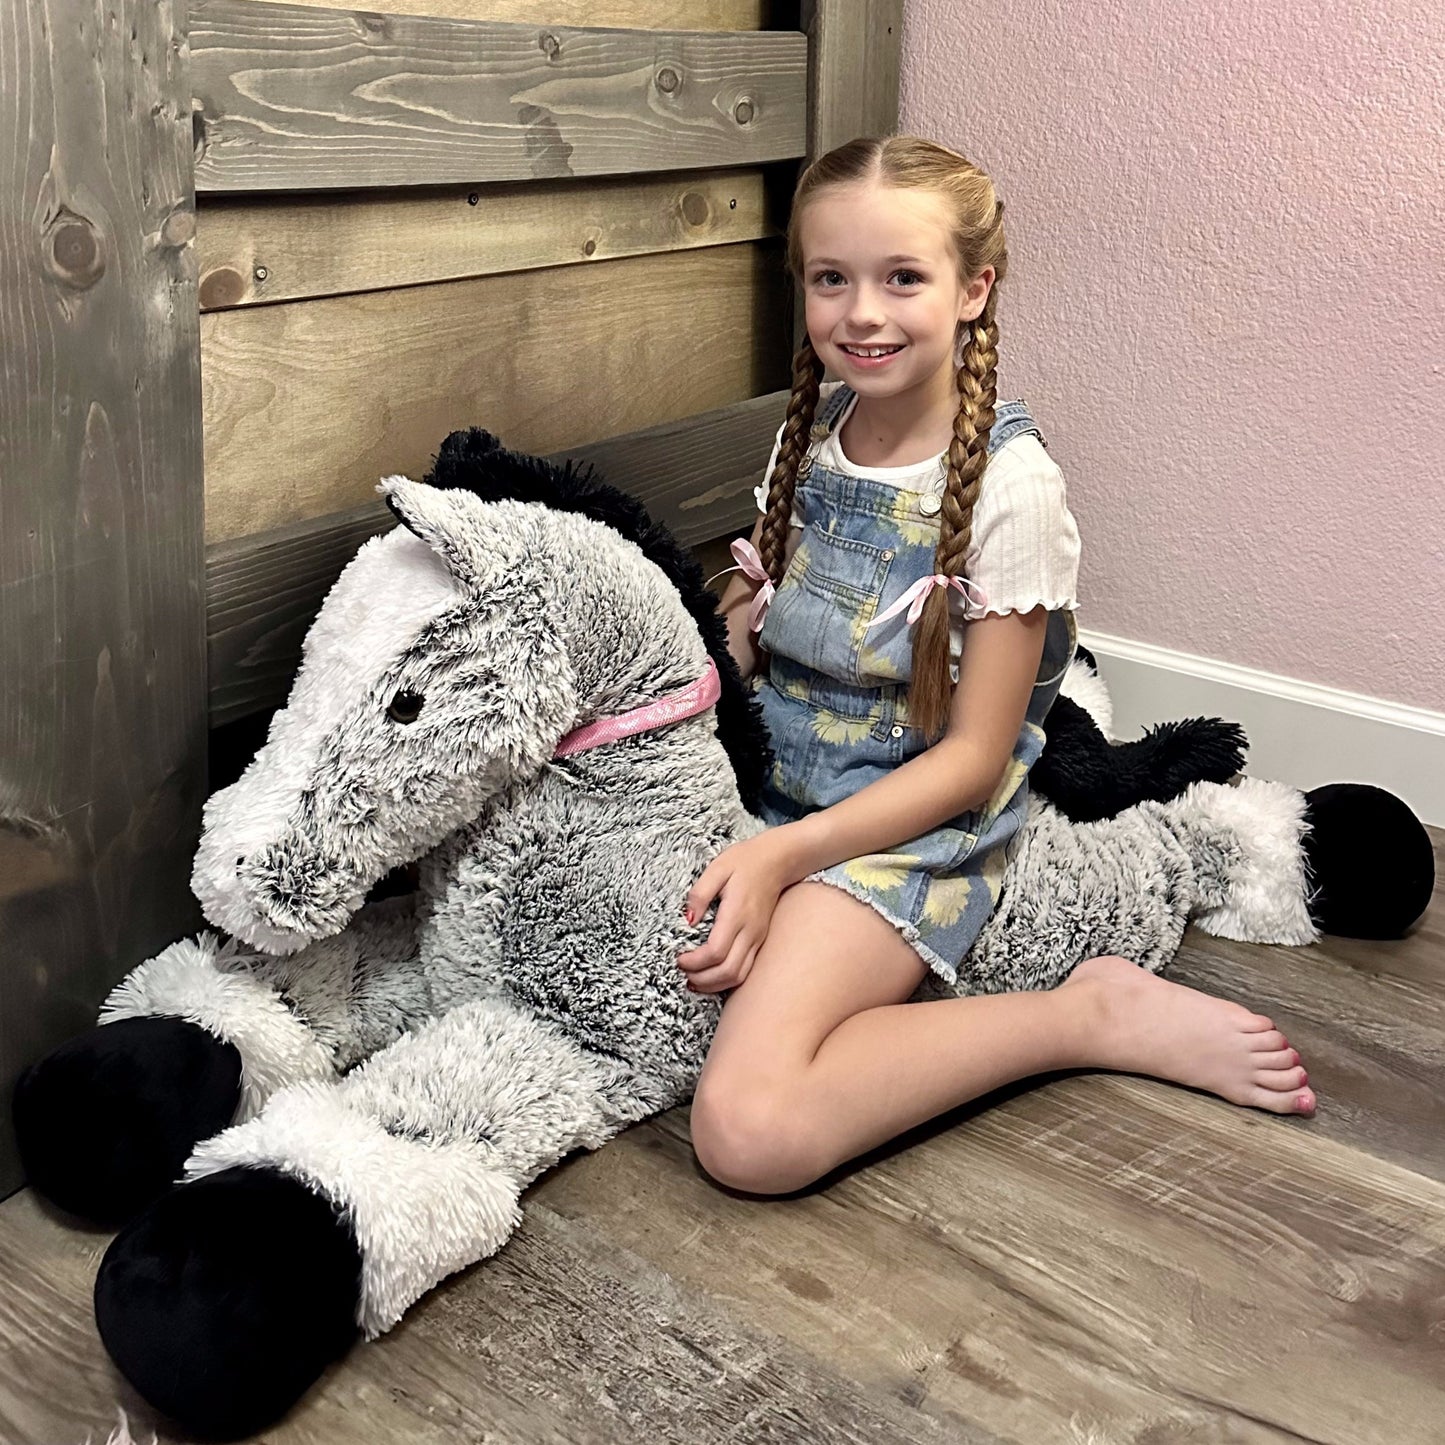 Giant Horse Stuffed Toy, Grey/Brown, 35/47 Inches - MorisMos Stuffed Animals